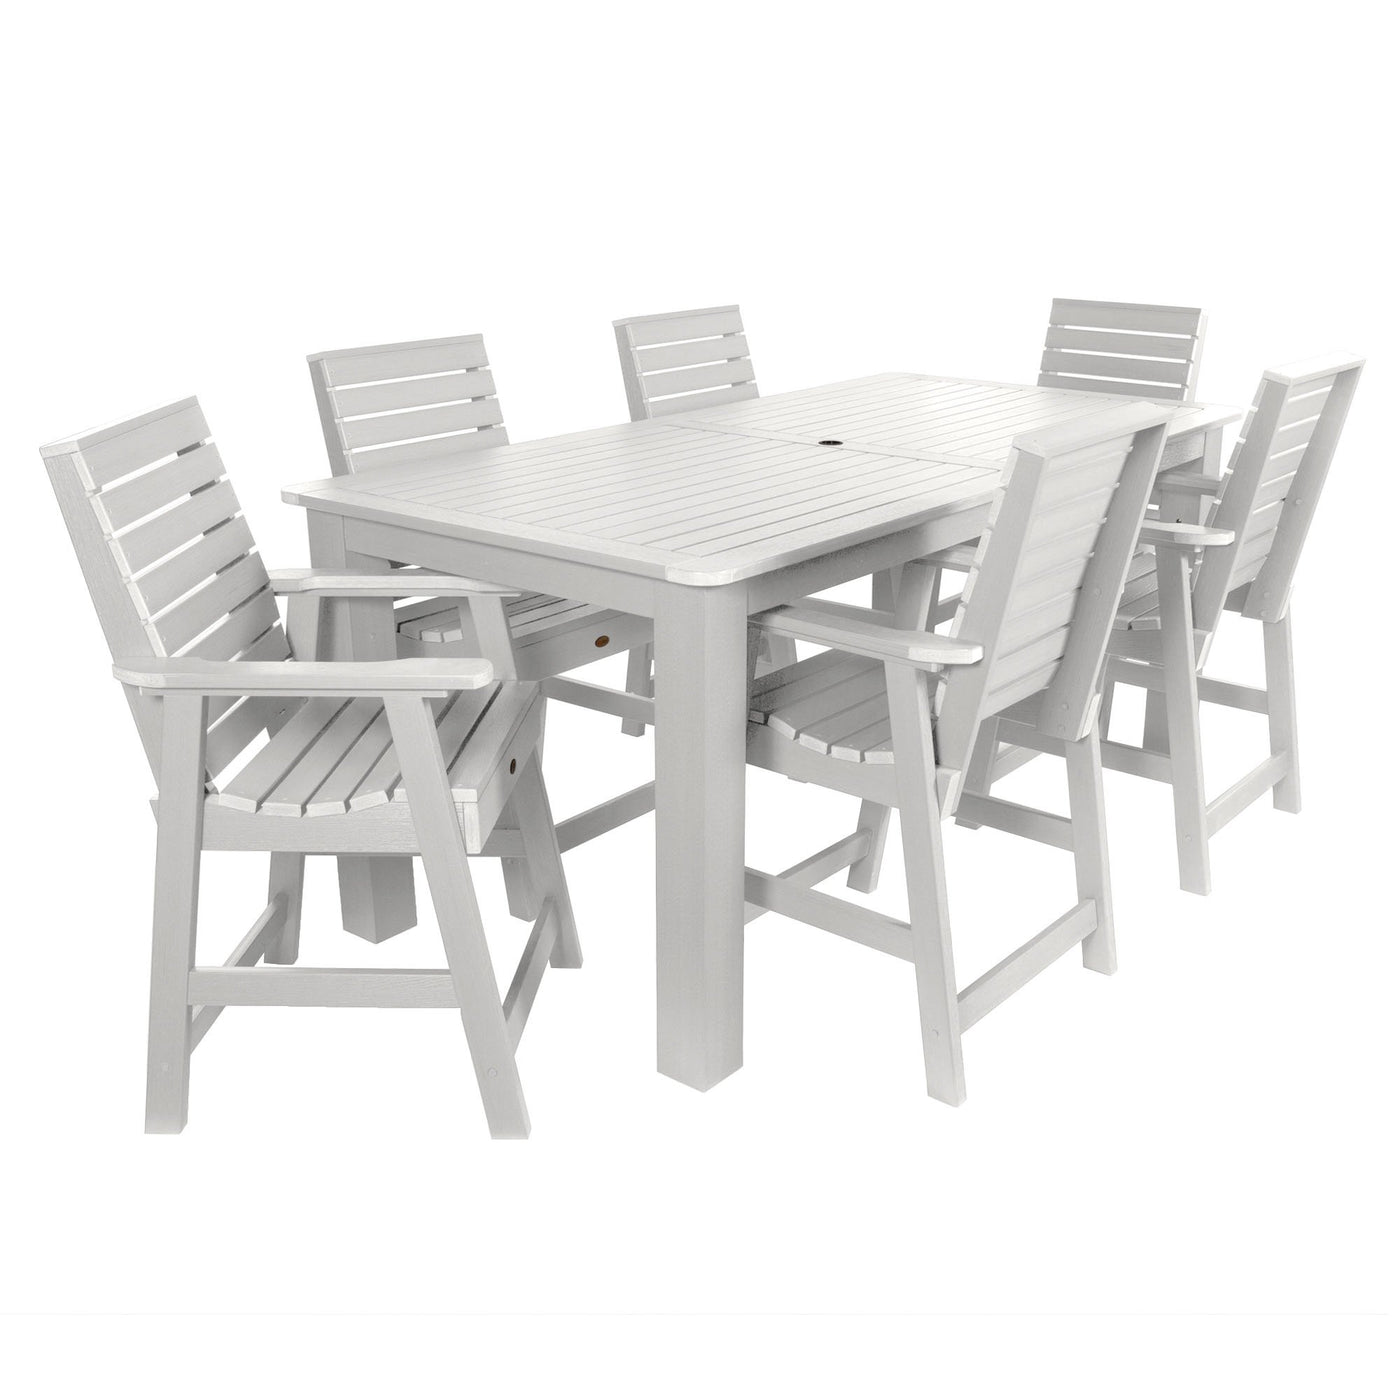 Weatherly 7pc Rectangular Outdoor Dining Set 42in x 84in - Counter Height Dining Highwood USA White 